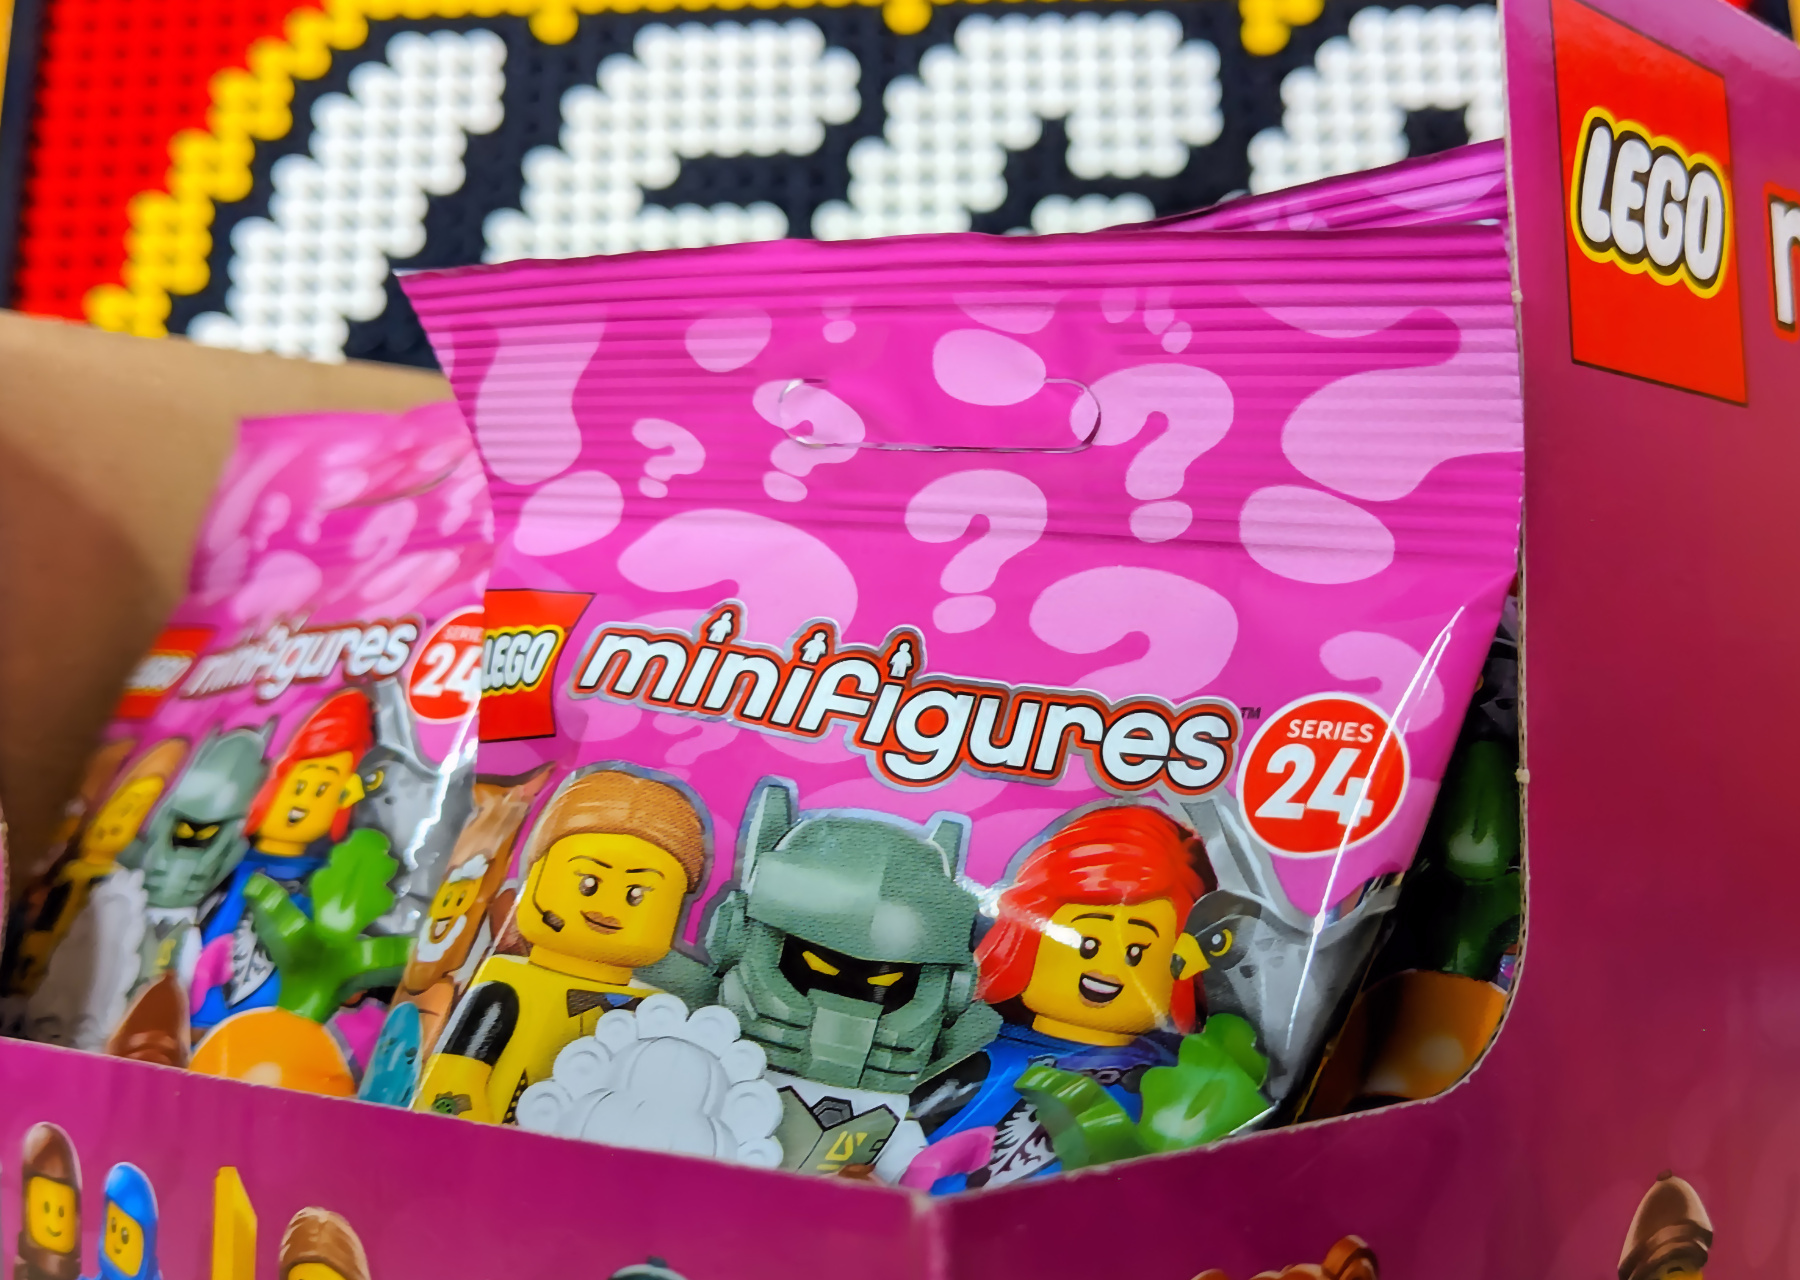 LEGO Series 24 Case of 36 Collectible Minifigures 71037